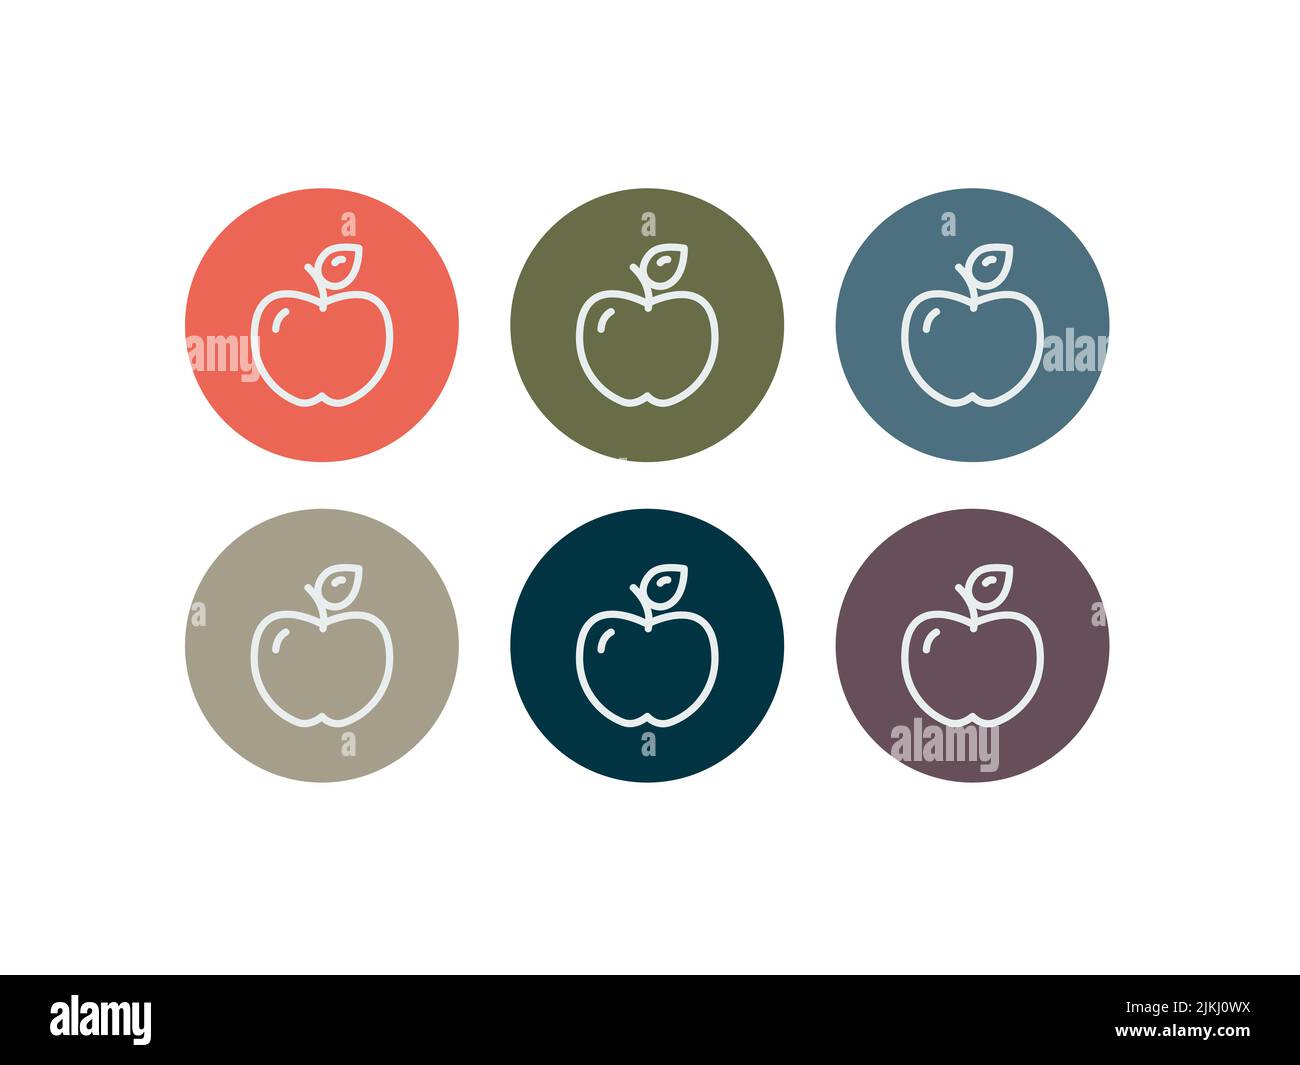 Apple icon set for mobile apps, web design and graphic design vector illustration Stock Vector